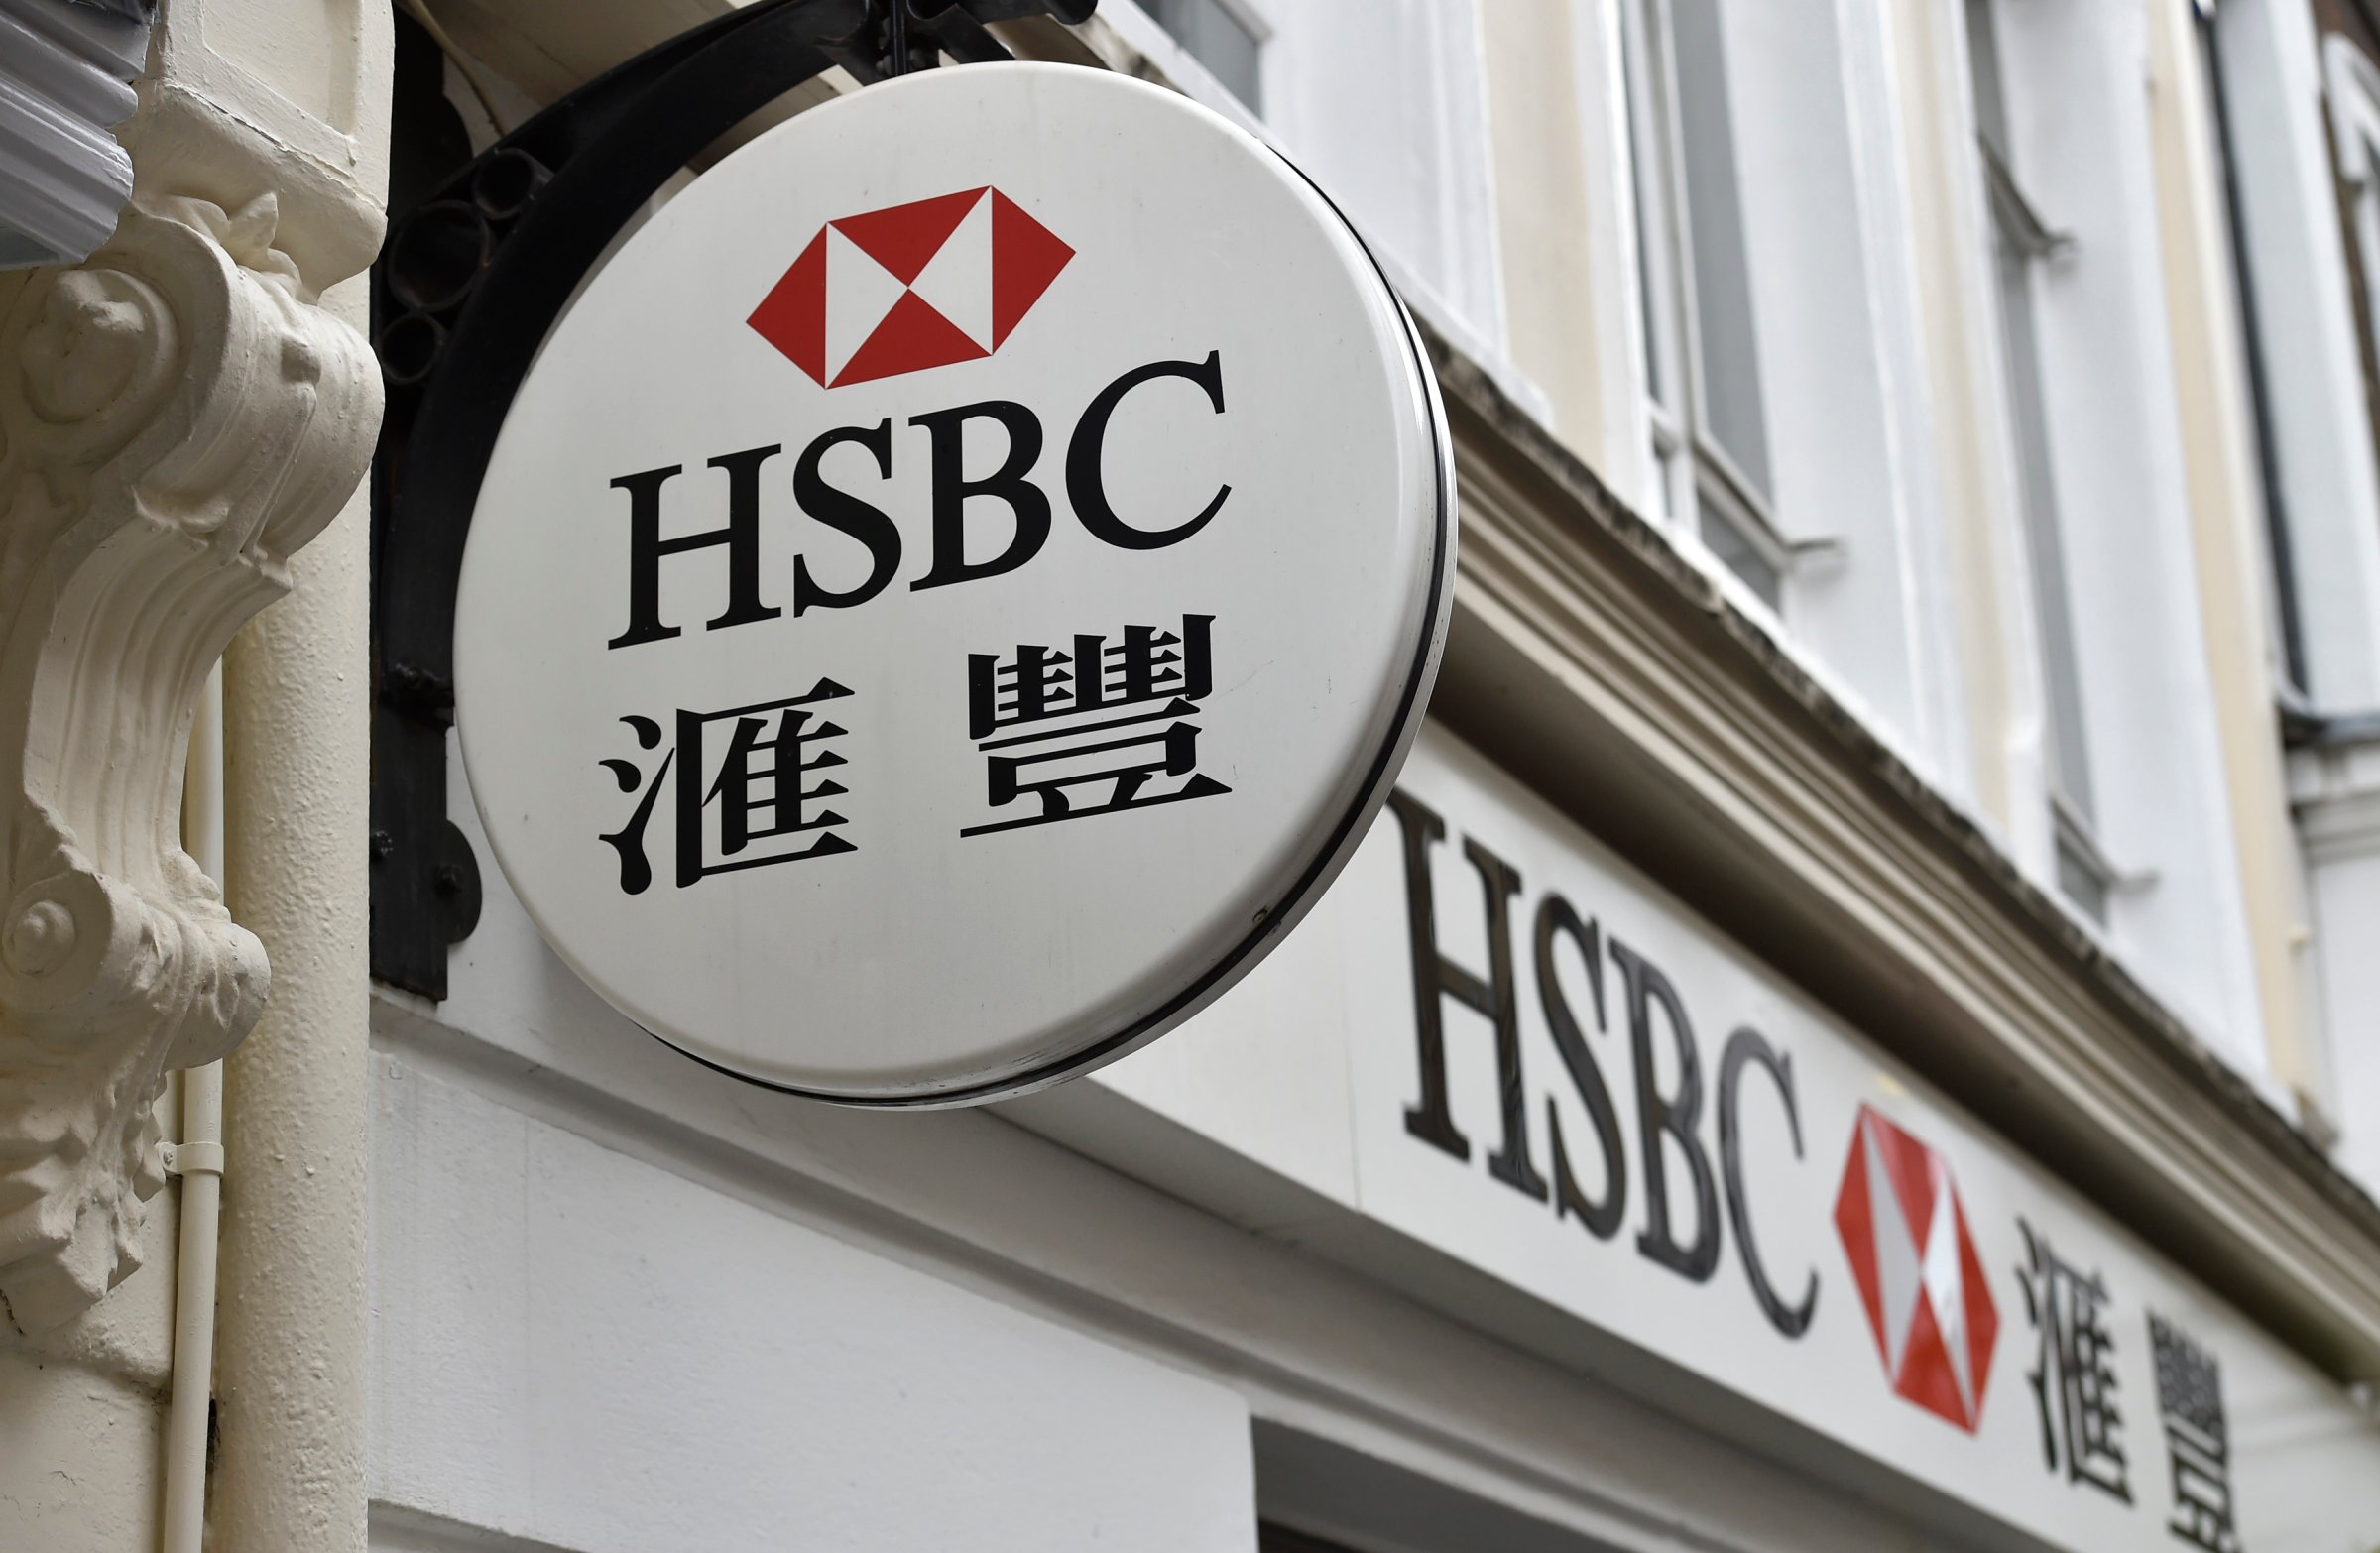 A branch of HSBC is seen in Chinatown in central London